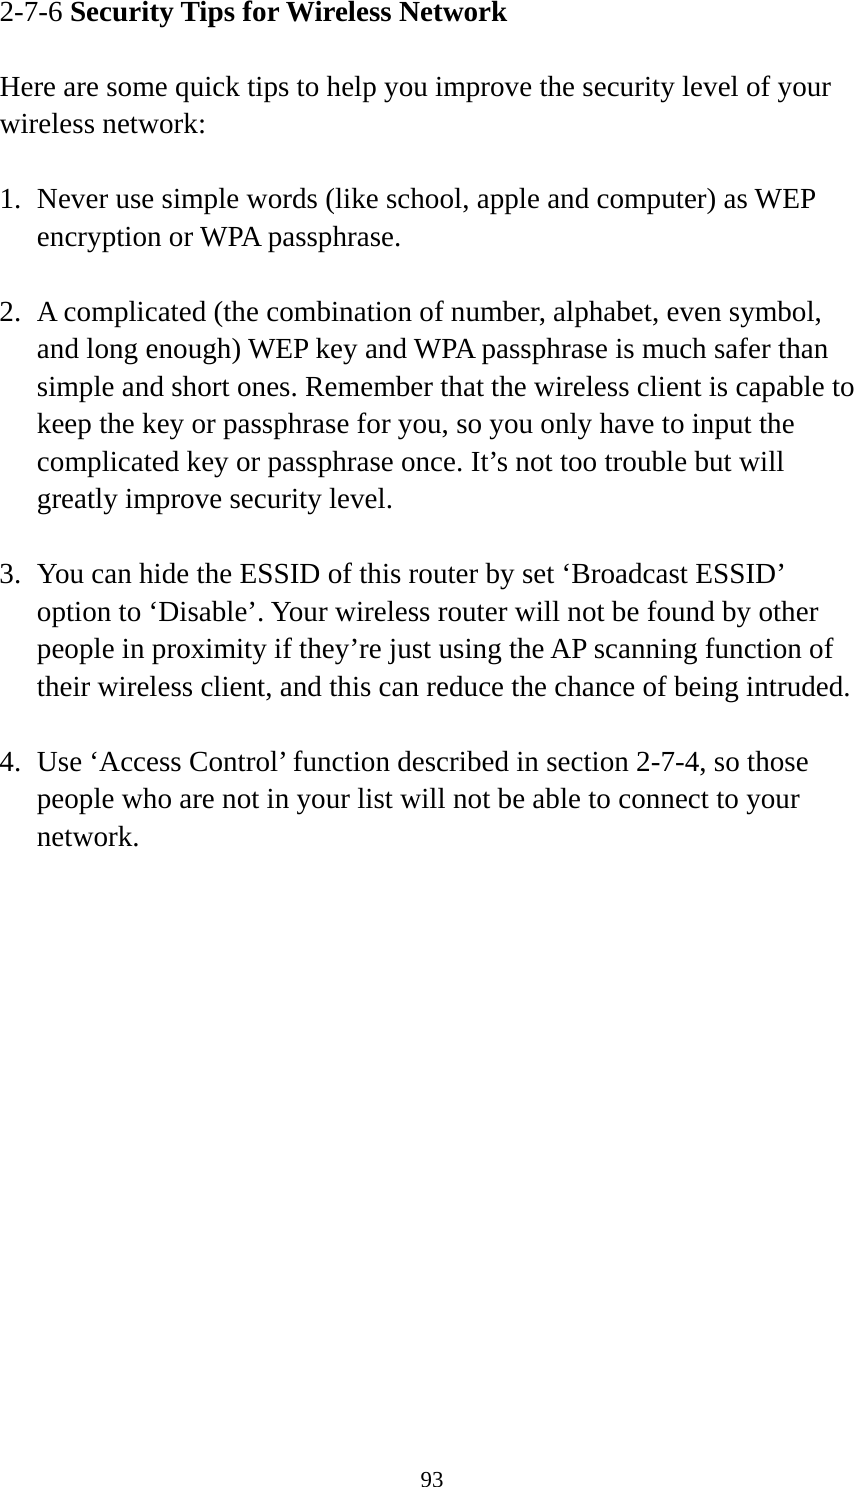 93 2-7-6 Security Tips for Wireless Network  Here are some quick tips to help you improve the security level of your wireless network:  1. Never use simple words (like school, apple and computer) as WEP encryption or WPA passphrase.  2. A complicated (the combination of number, alphabet, even symbol, and long enough) WEP key and WPA passphrase is much safer than simple and short ones. Remember that the wireless client is capable to keep the key or passphrase for you, so you only have to input the complicated key or passphrase once. It’s not too trouble but will greatly improve security level.  3. You can hide the ESSID of this router by set ‘Broadcast ESSID’ option to ‘Disable’. Your wireless router will not be found by other people in proximity if they’re just using the AP scanning function of their wireless client, and this can reduce the chance of being intruded.  4. Use ‘Access Control’ function described in section 2-7-4, so those people who are not in your list will not be able to connect to your network. 